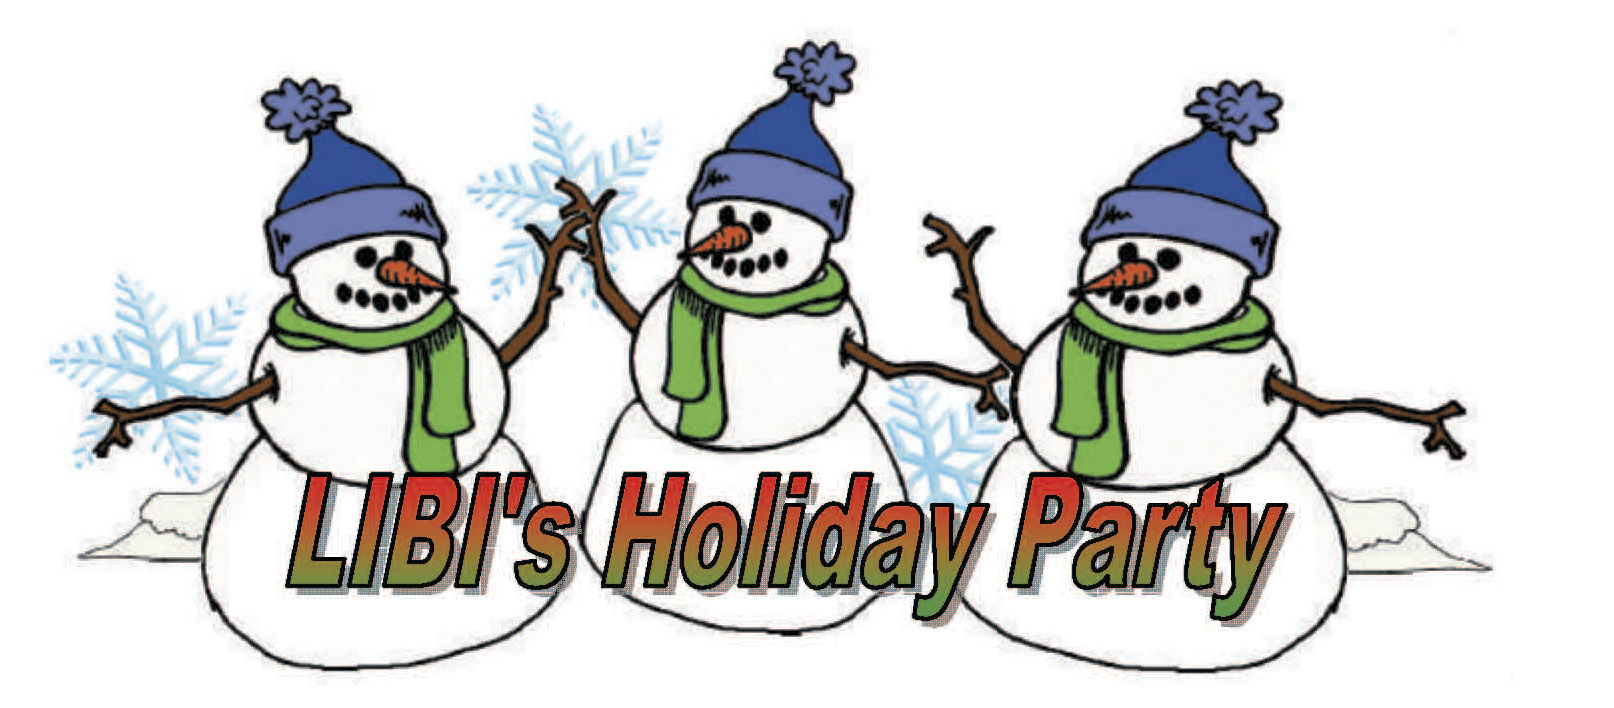 clipart christmas party - photo #43